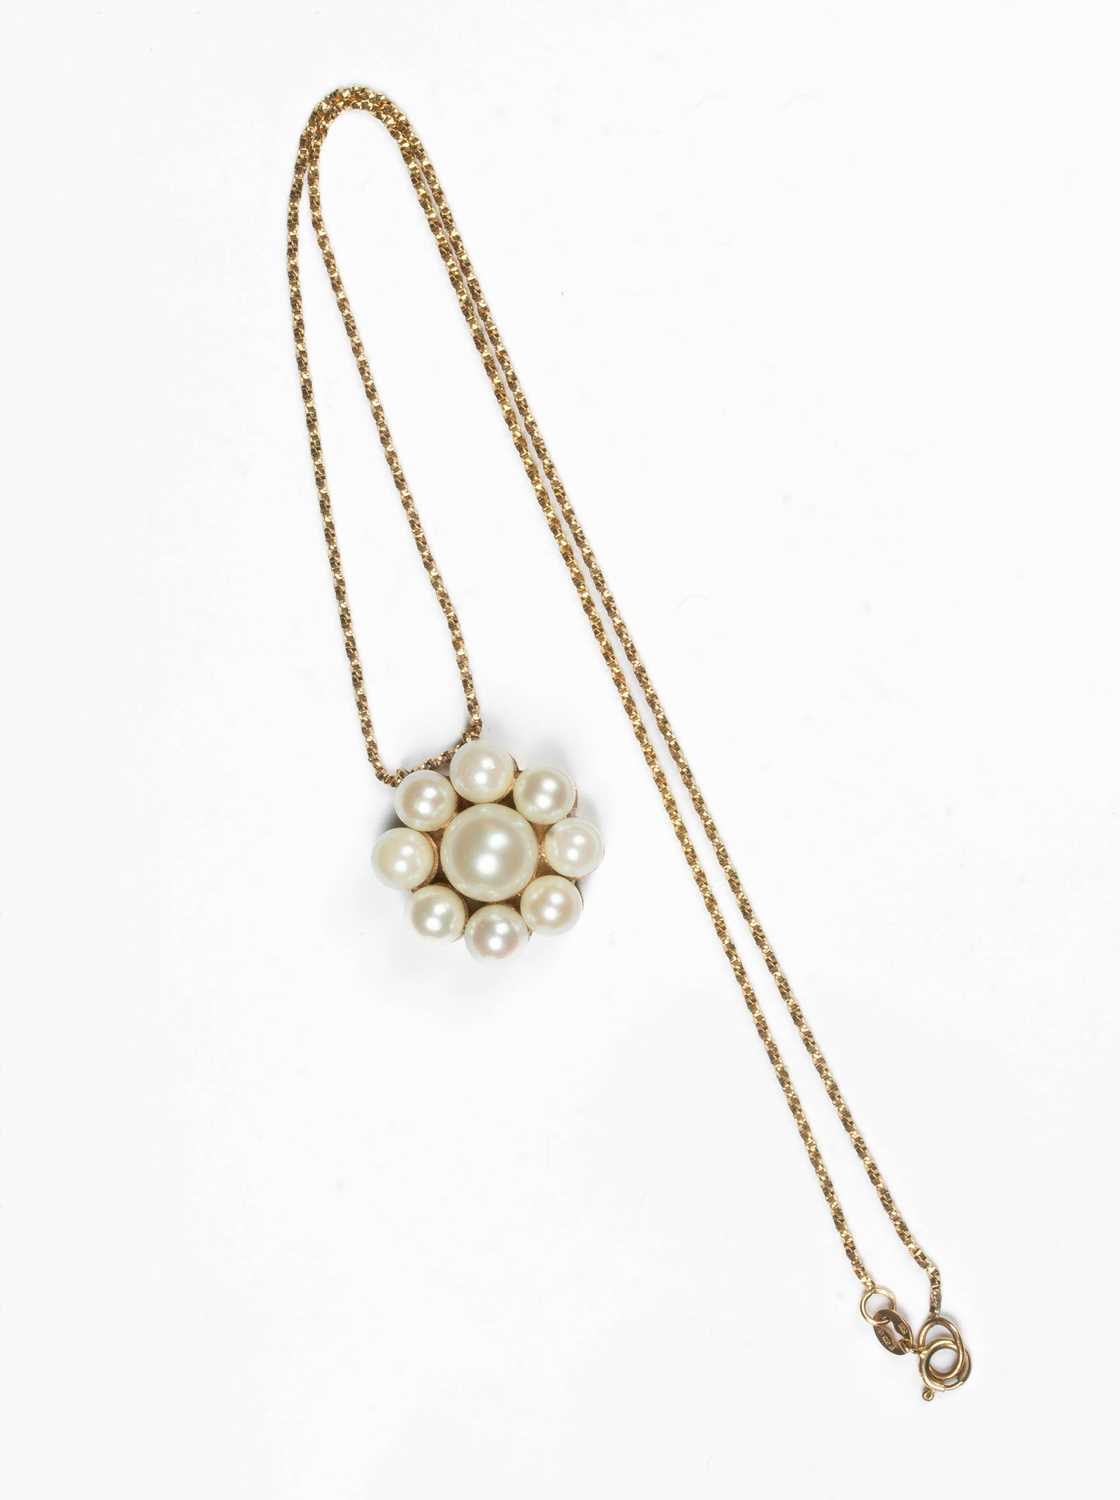 A 9ct gold and cultured pearl pendant necklace - Image 2 of 3